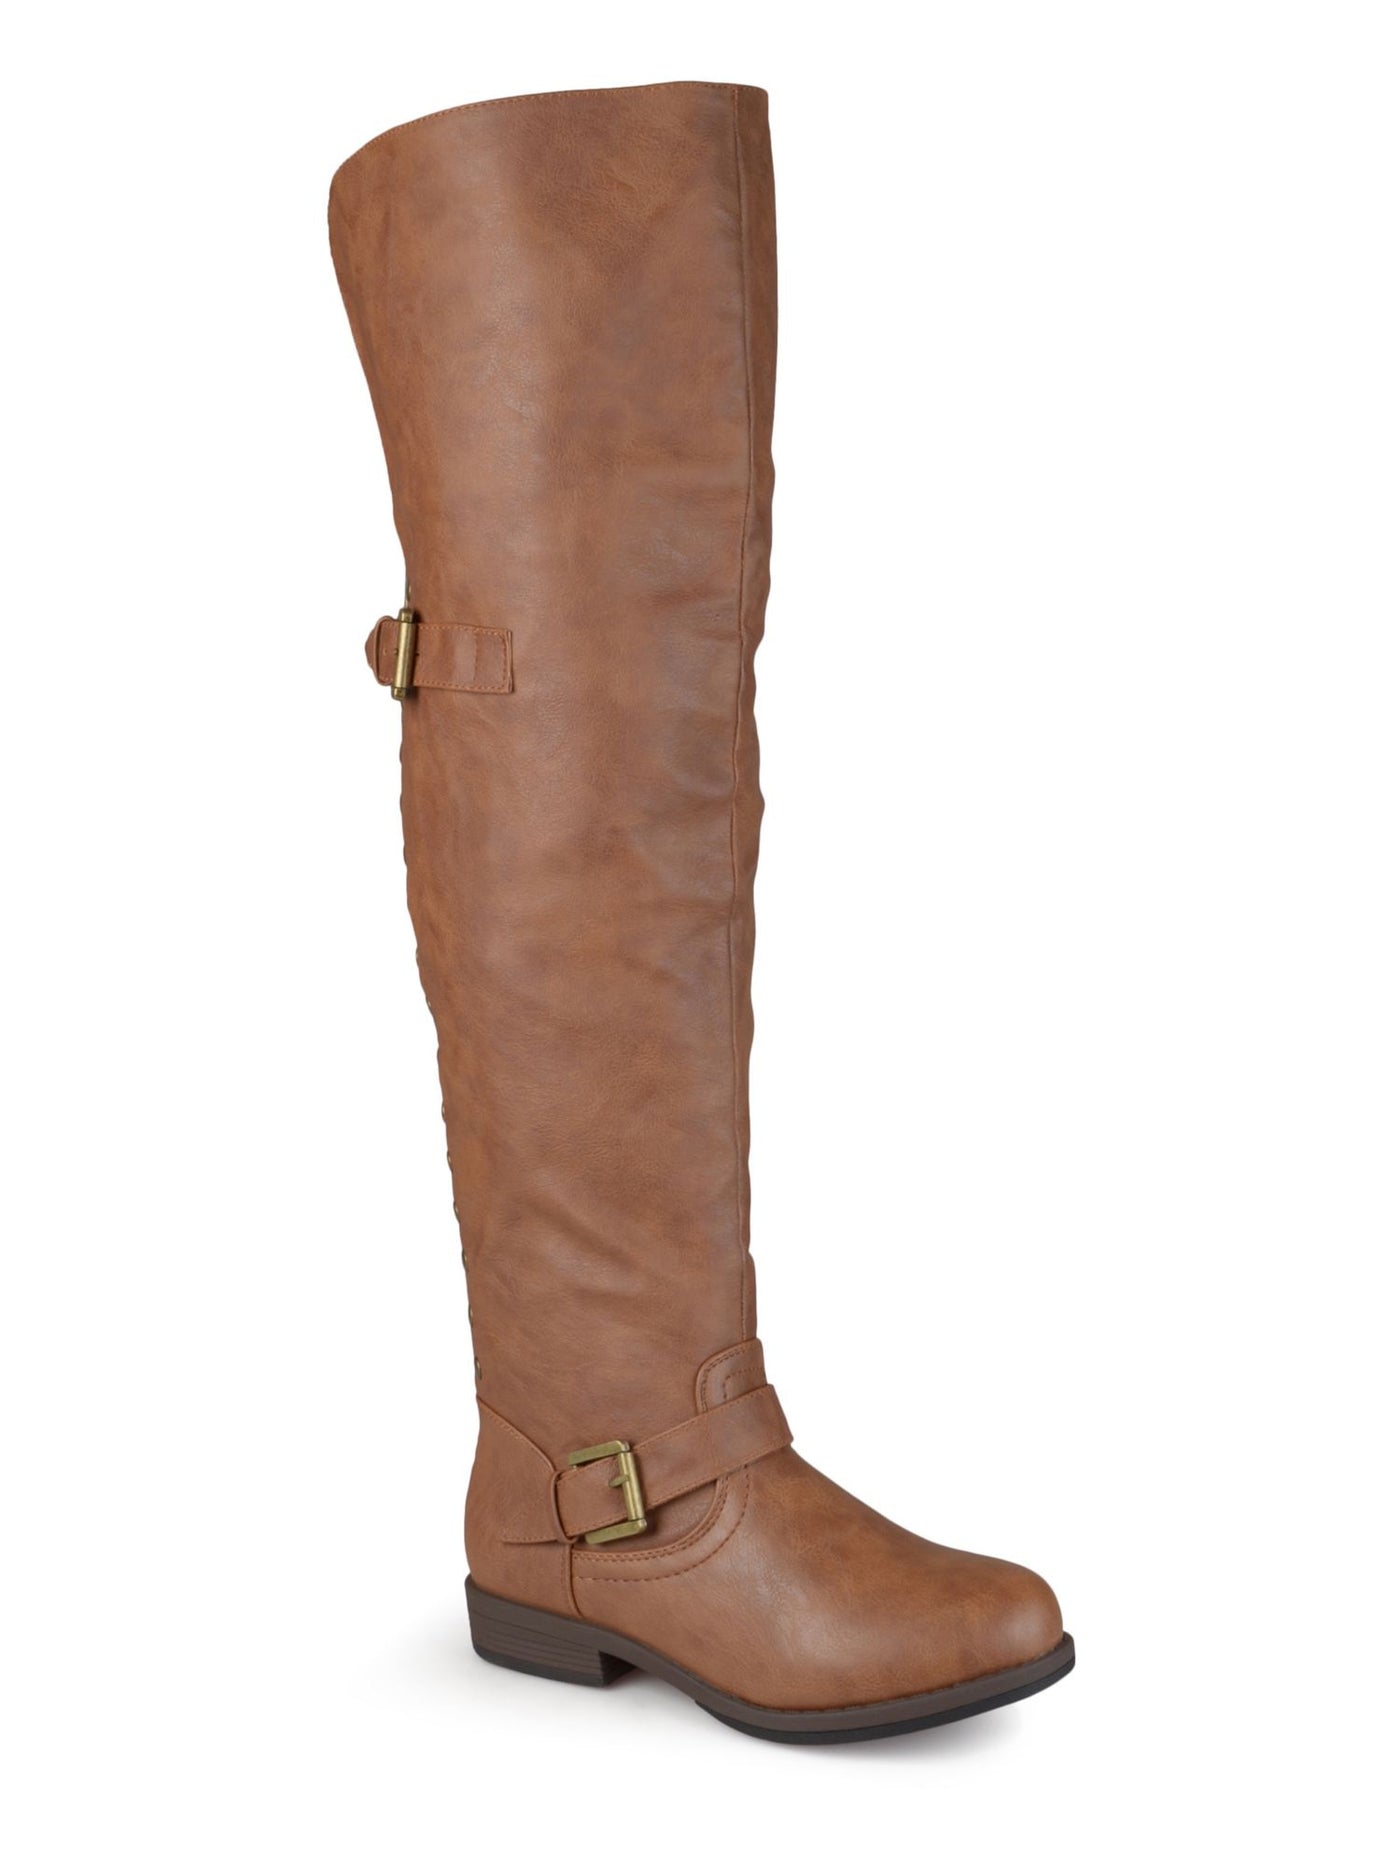 JOURNEE COLLECTION Womens Brown Pocket Buckle Accent Studded Kane Round Toe Block Heel Zip-Up Riding Boot 8.5 WC